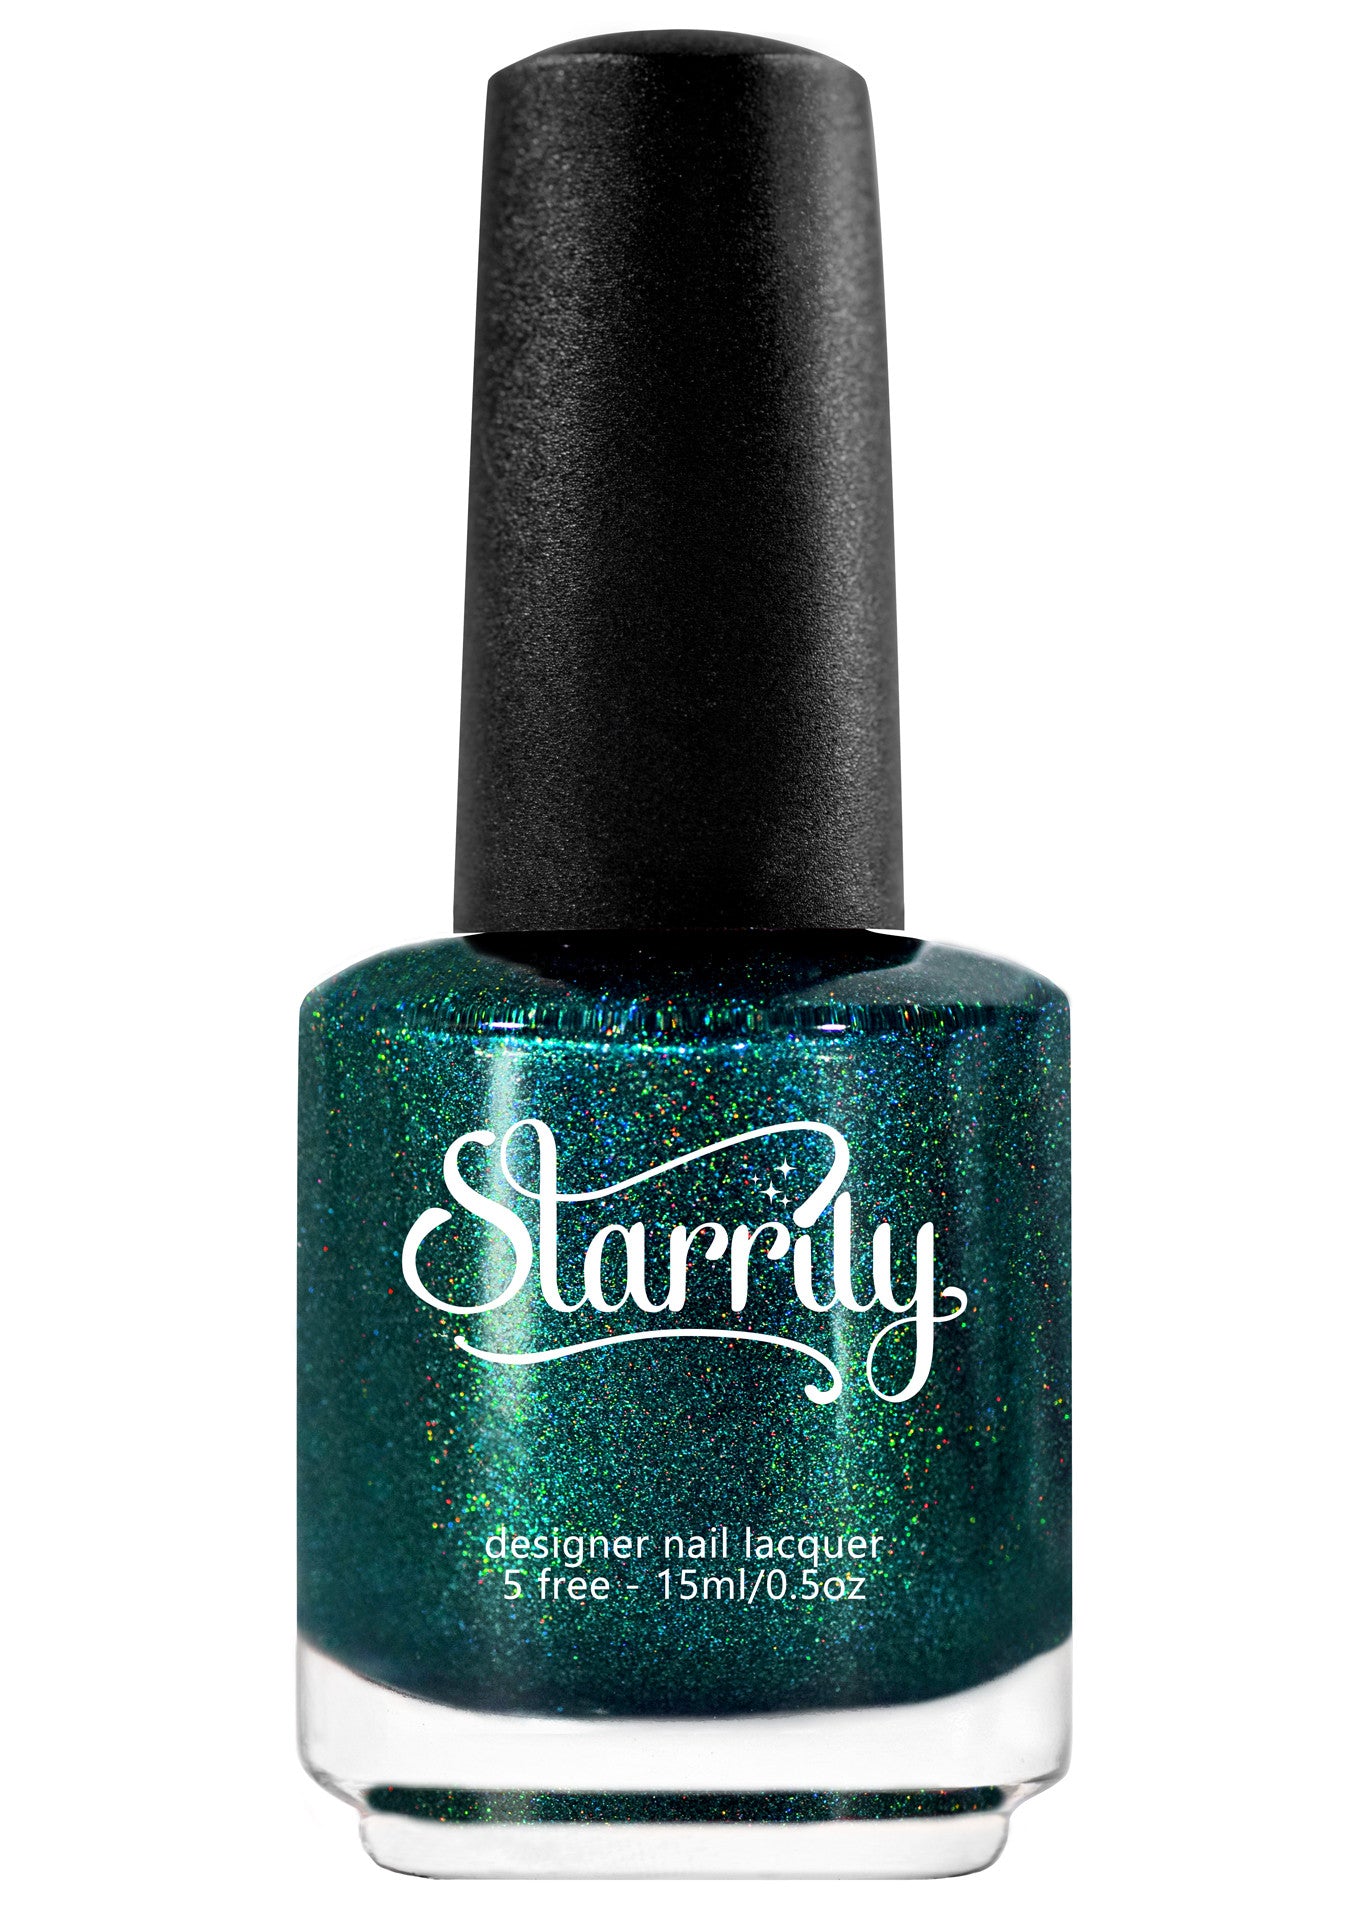 Quantum Energy is a beautiful green linear holographic nail polish